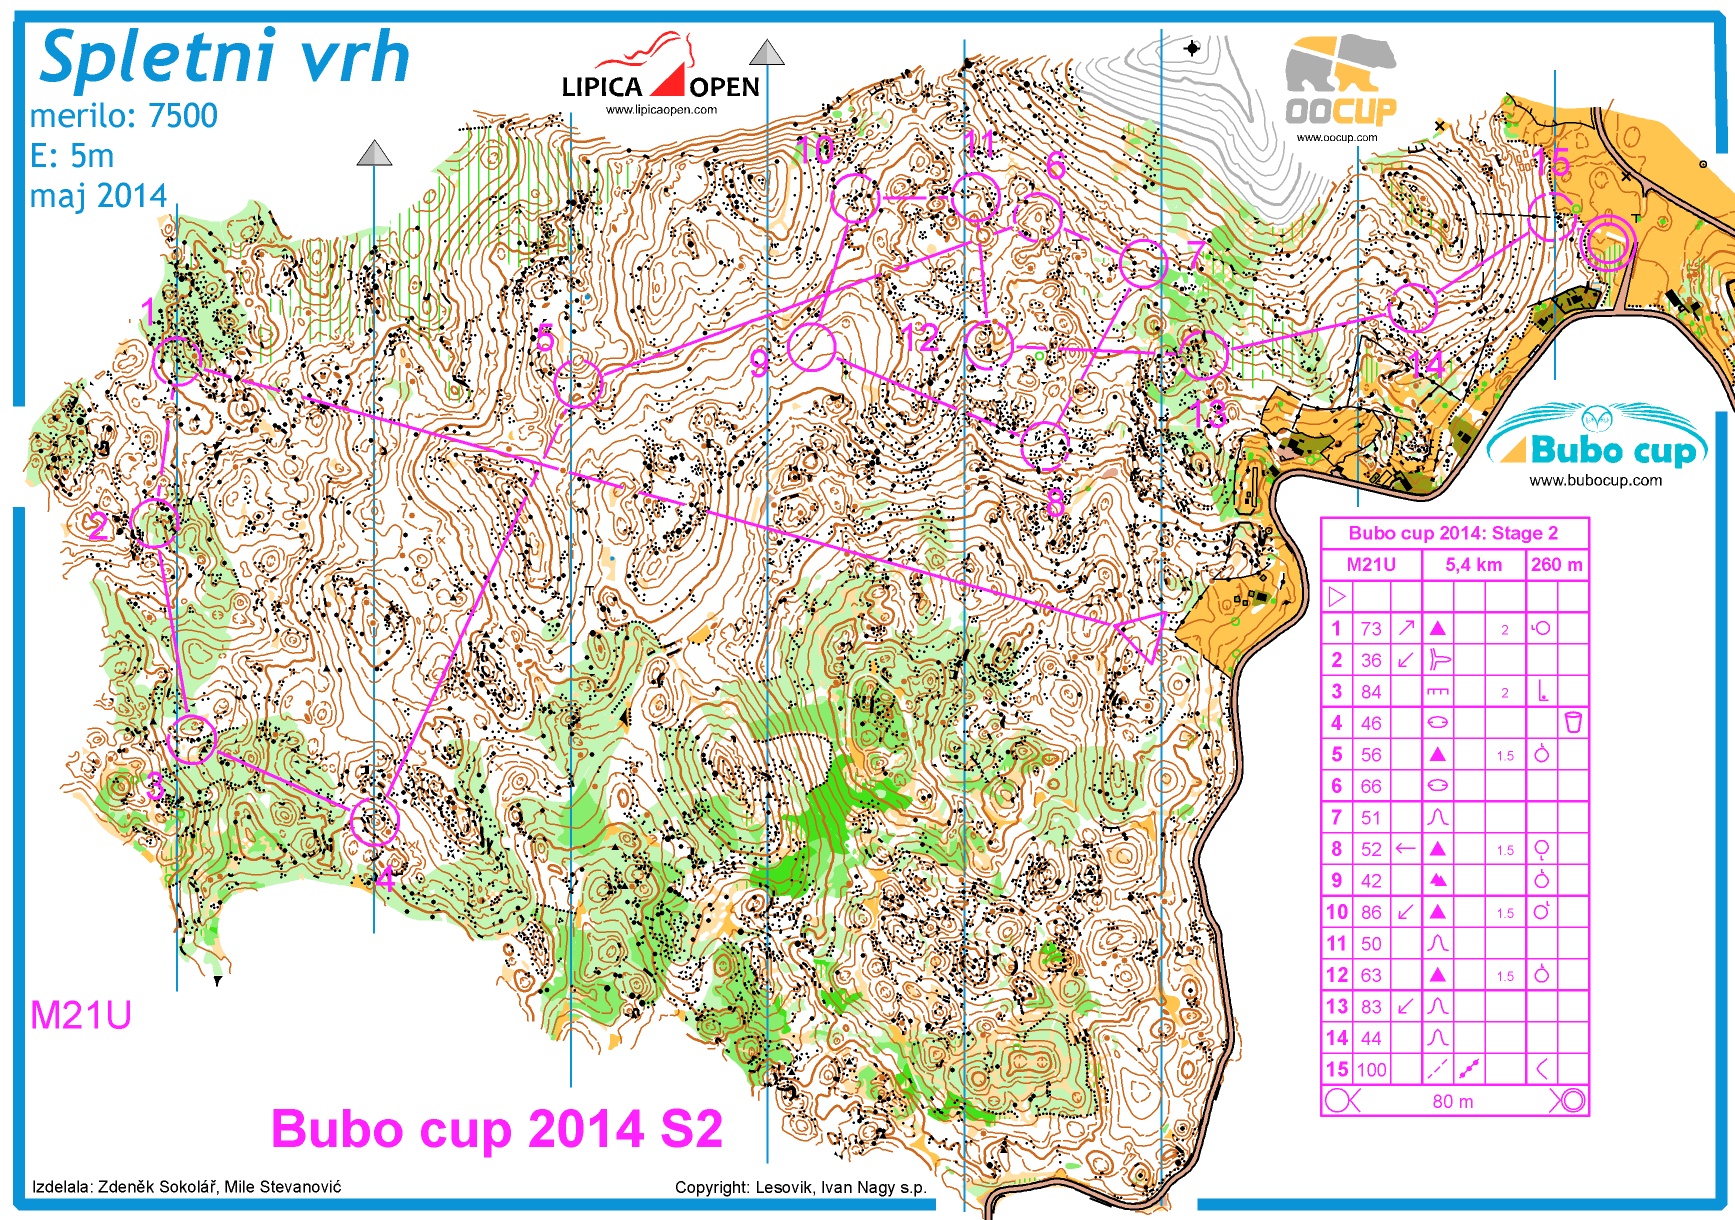 Bubo cup 2014 M21U Stage2 (25-07-2014)